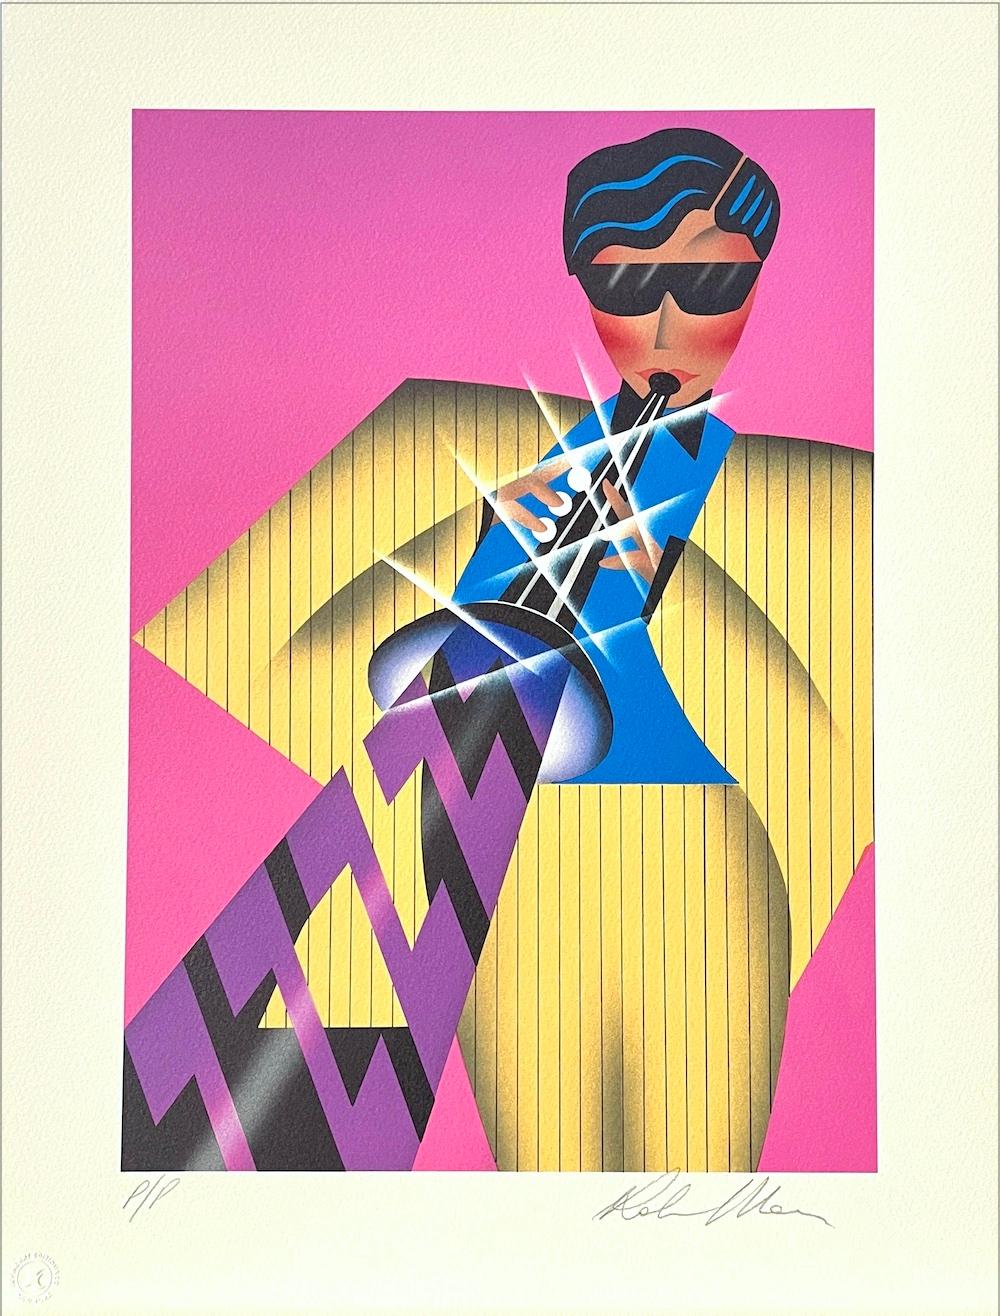 Robin Morris Figurative Print - CALYPSO Signed Lithograph Man Playing Clarinet Yellow Pin Stripe Suit, Hot Pink